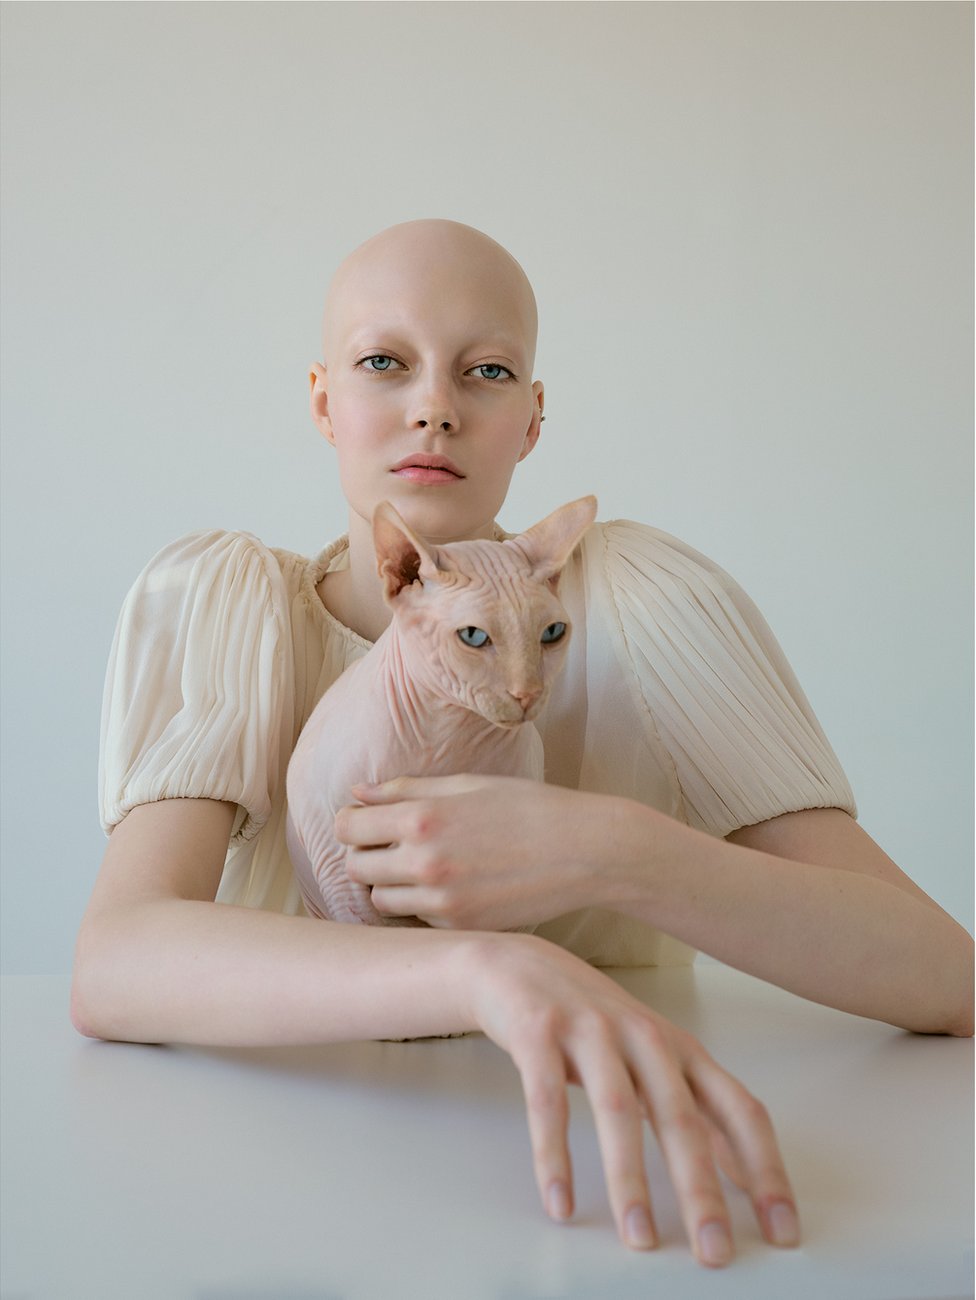 A young woman without hair holds a bald cat